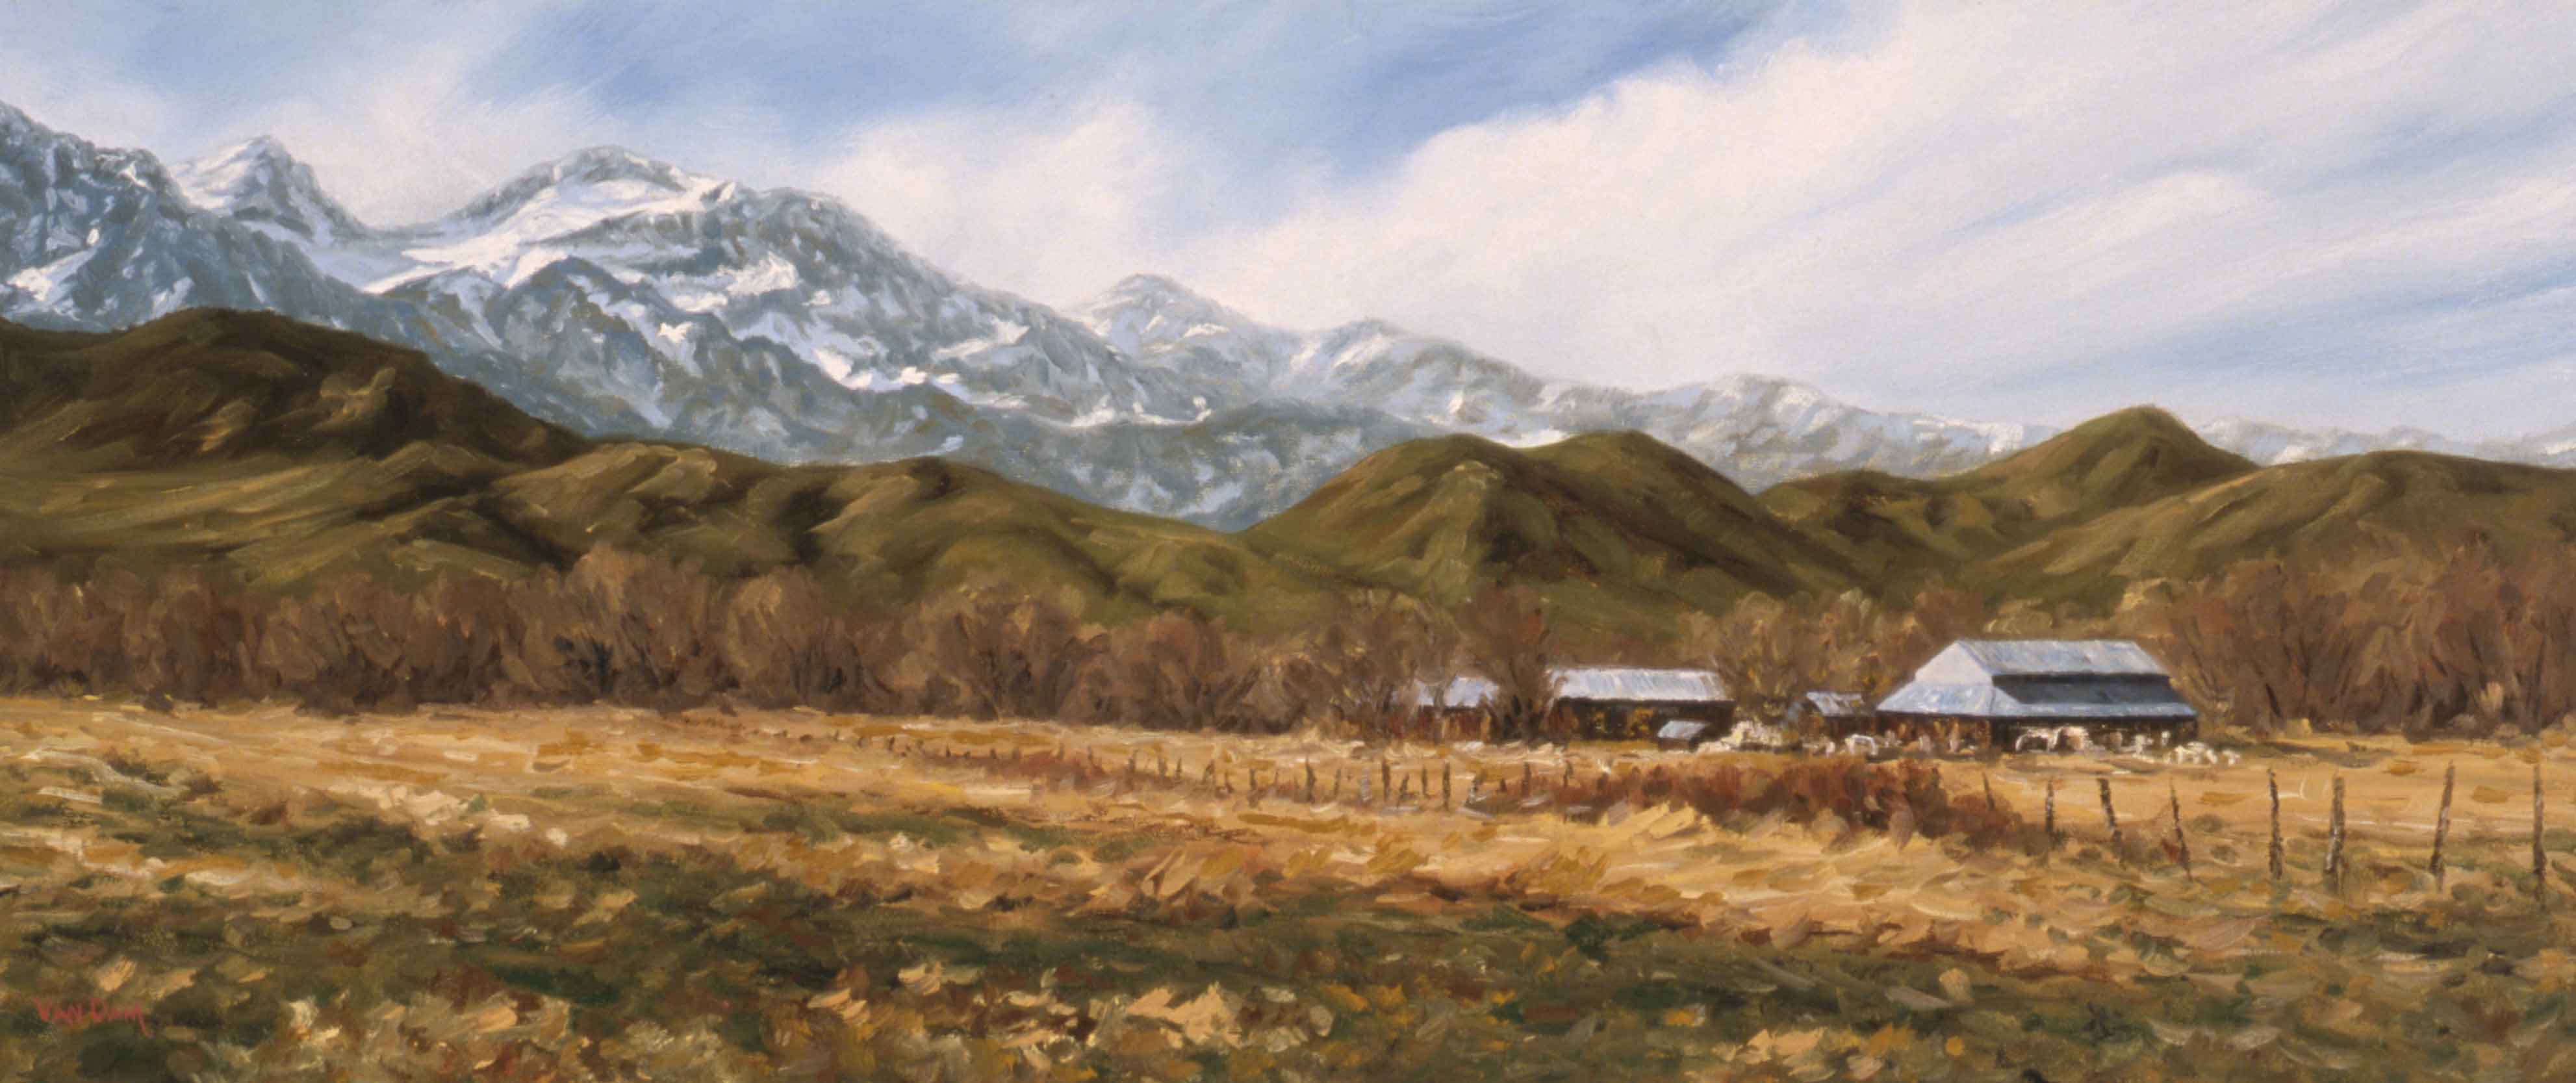 Ranch in fron of Snow Capped Mountains